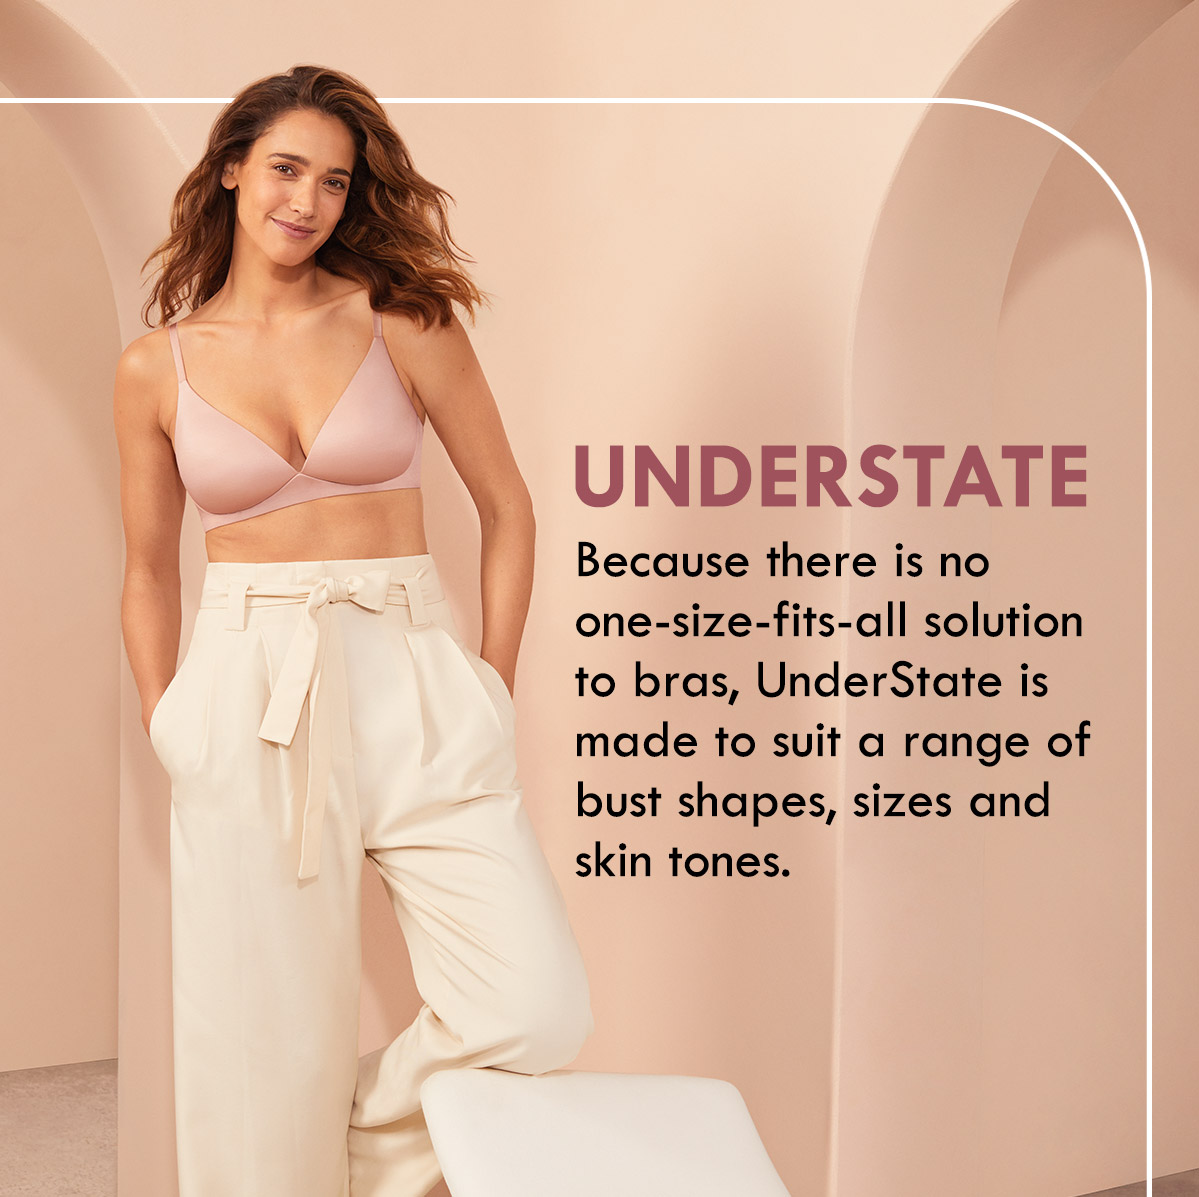 Understate. Because there is no one-size-fits-all solution to bras, UnderState is made to suit a range of bust shapes, sizes and skin tones.